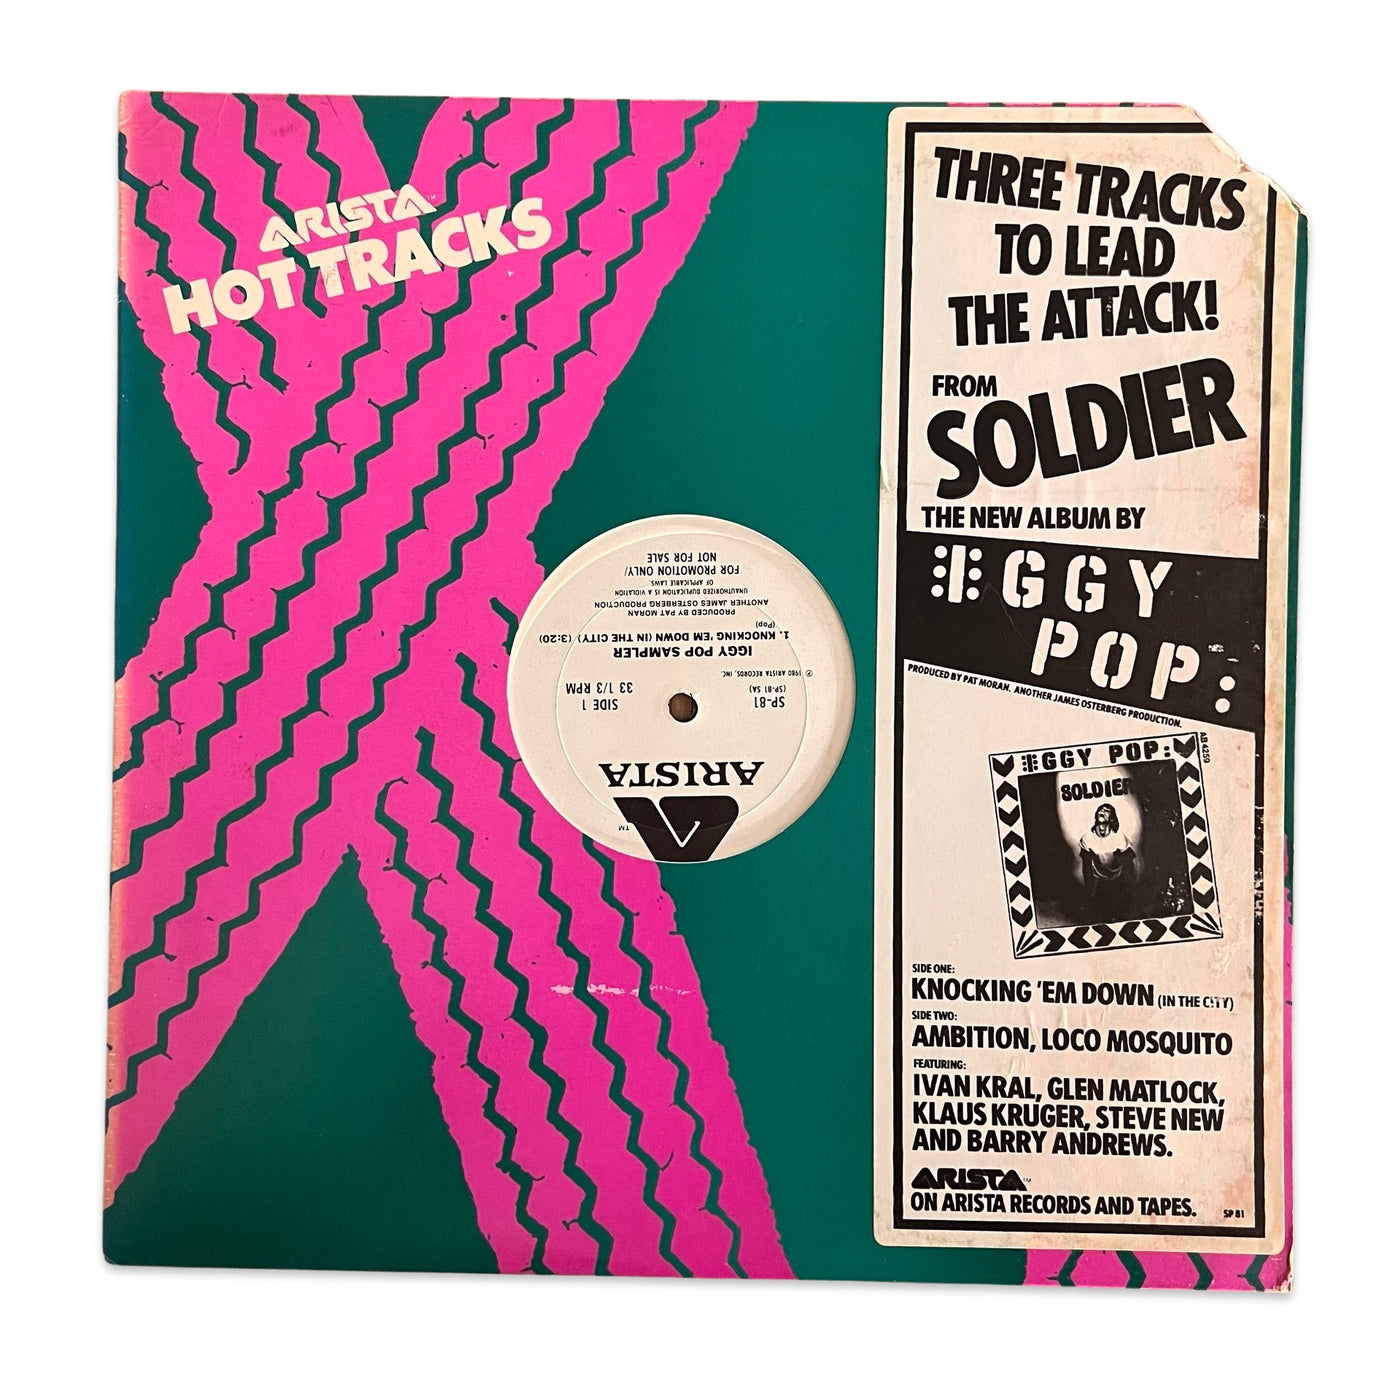 Iggy Pop – Three Tracks To Lead The Attack! From "Soldier"